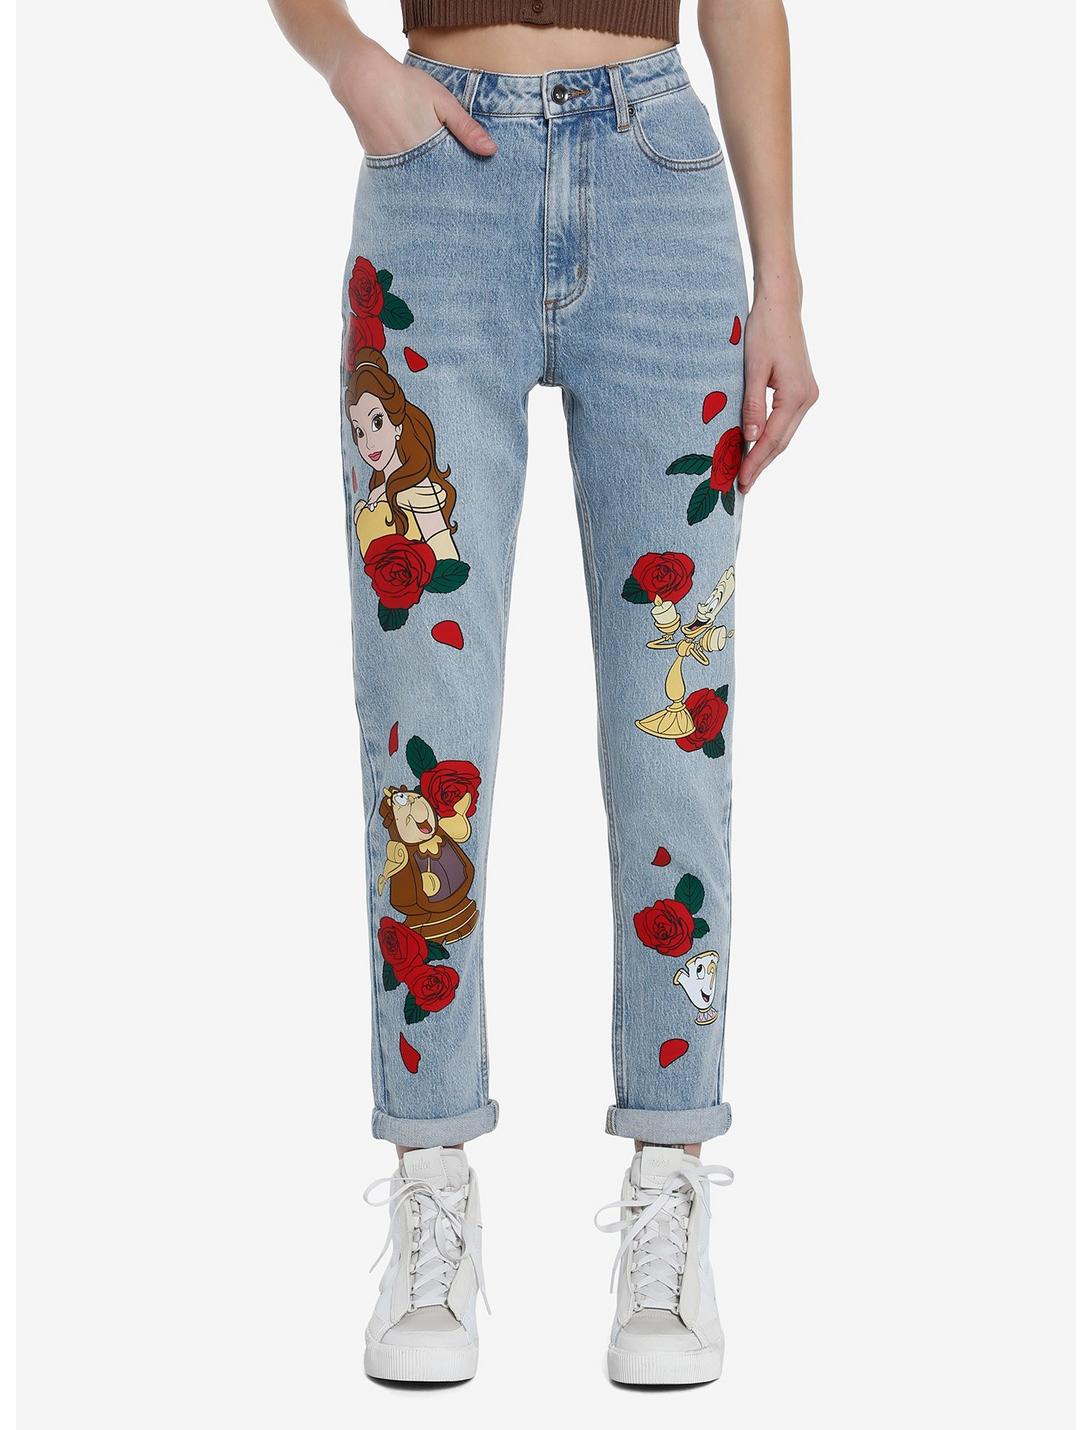 Her Universe Disney Beauty And The Beast Character Mom Jeans, LIGHT WASH, hi-res